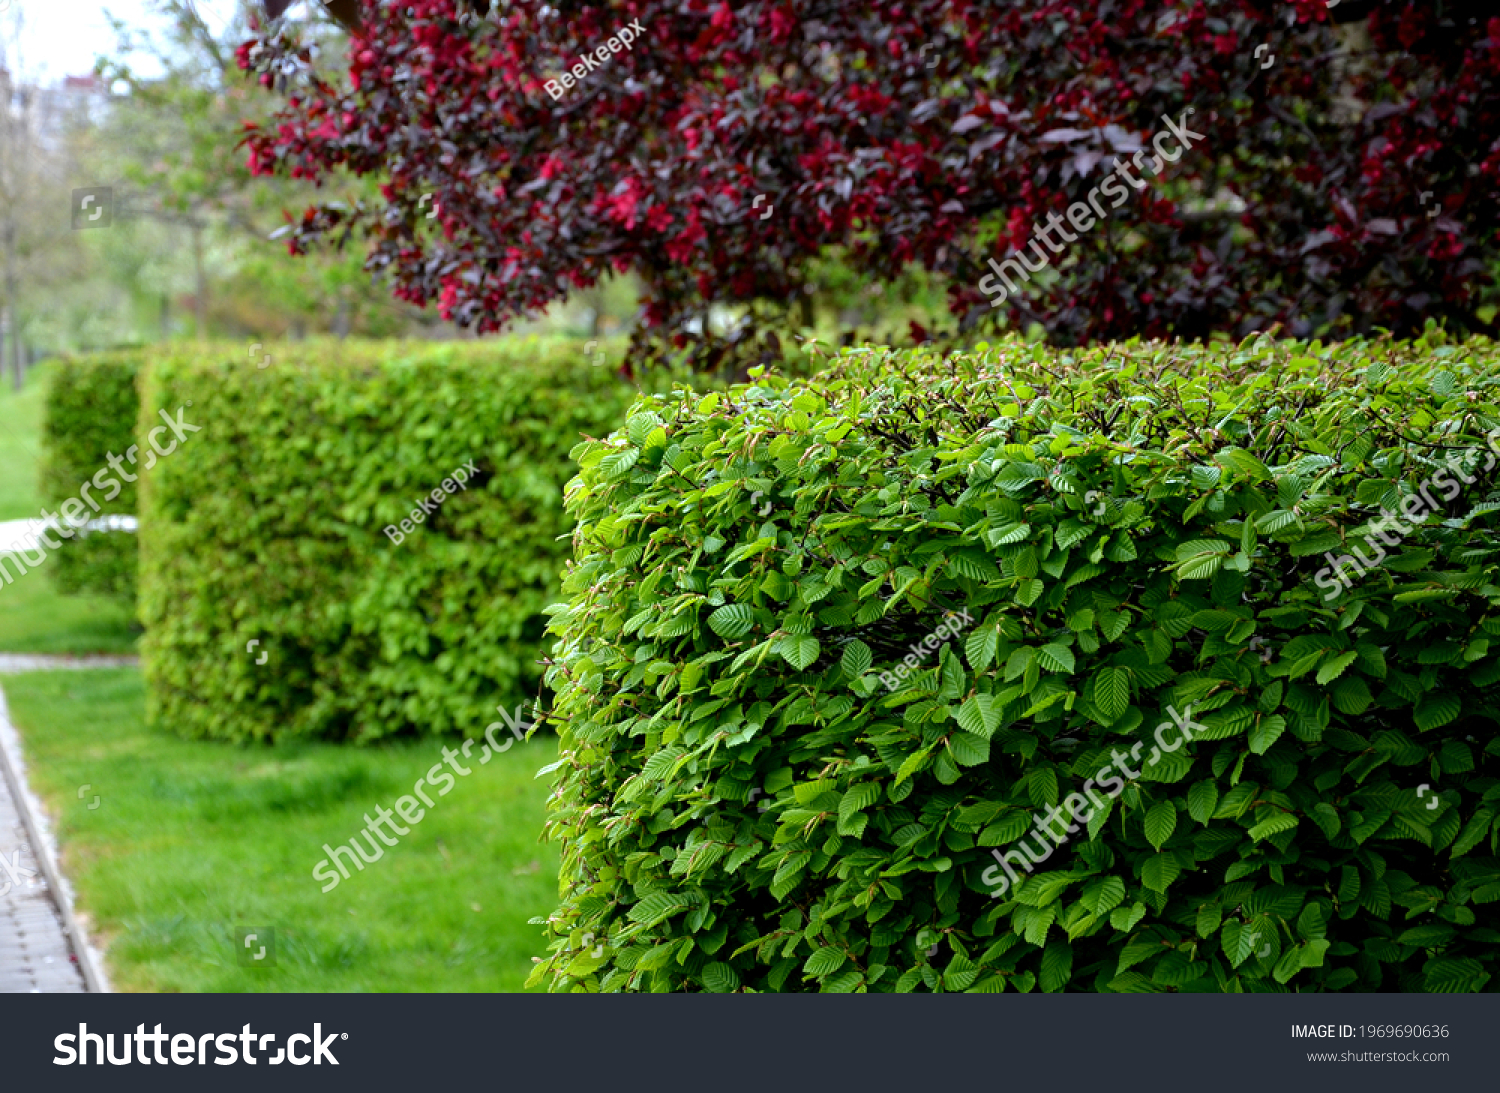 hornbeam green hedge in spring lush leaves let in light trunks and larger branches can be seen natural separation of the garden from the surroundings can withstand drought  #1969690636